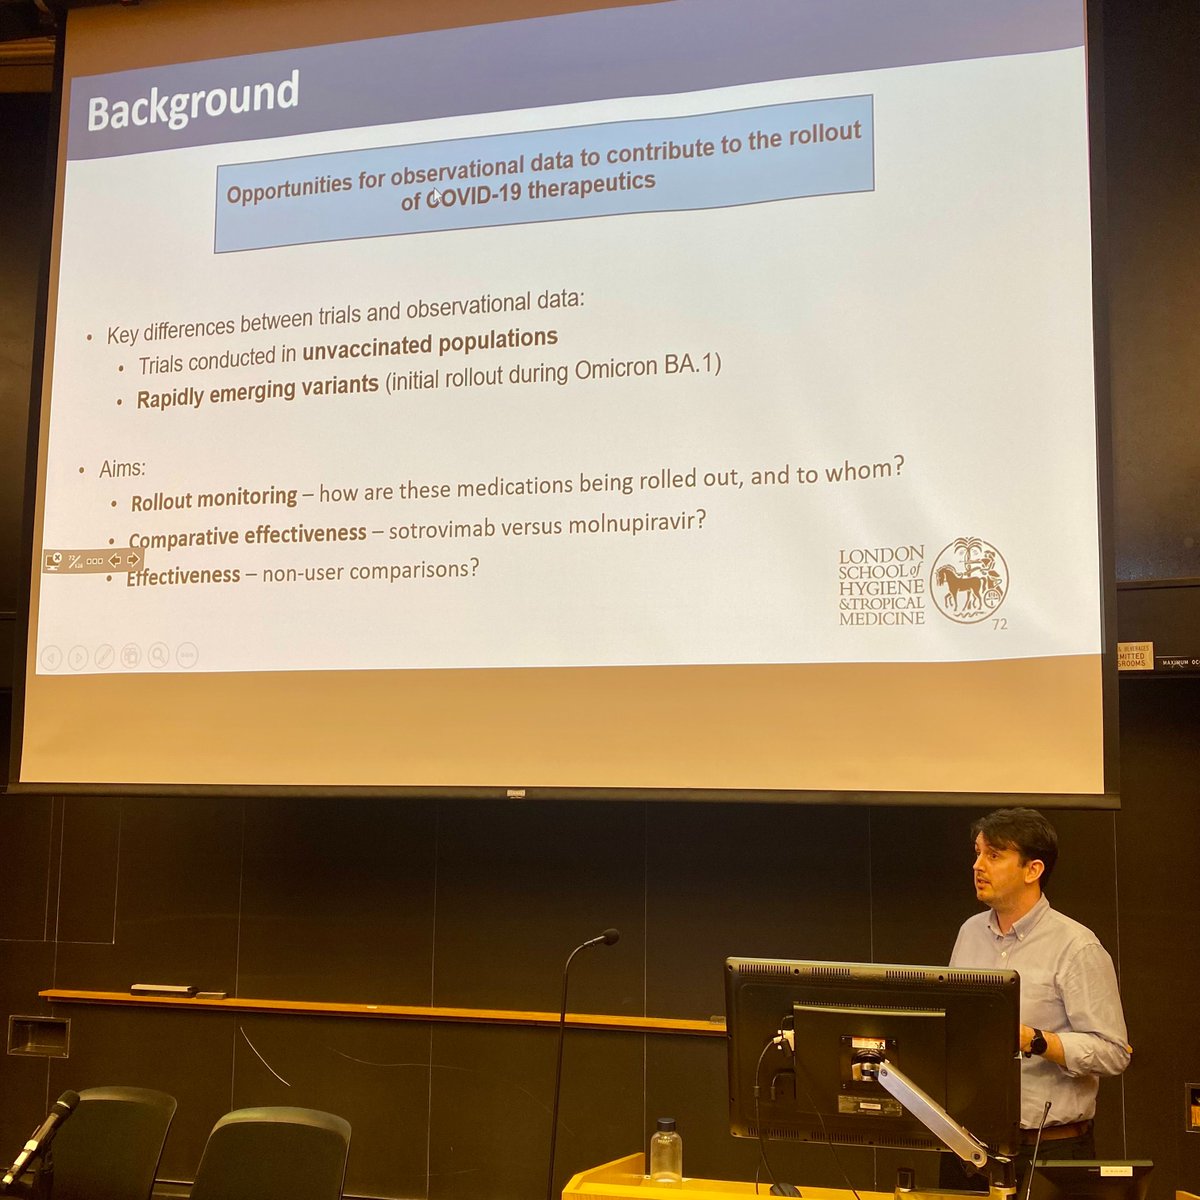 Halfway through our morning sessions at @CAUSALab's #KolokronesSyposium! Now we're learning from @JohnTStats, Statistical Pharmacoepidemiologist at @LSHTM who is presenting on #Causalinference for #therapeutics: OpenSAFELY and #COVID19.